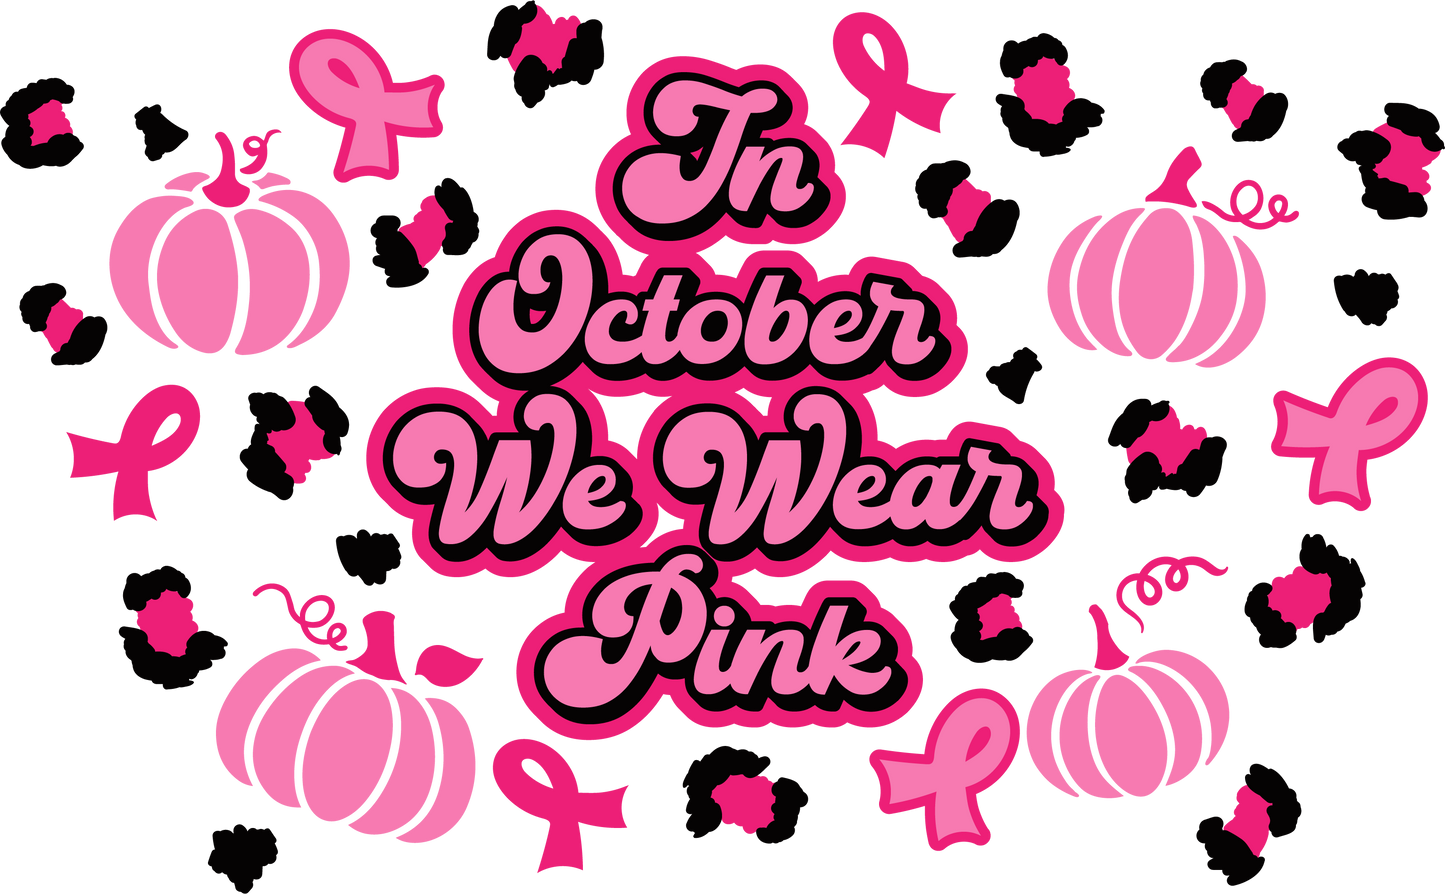 In october we wear pink  - NO HOLE 24 Oz cold cup UV DTF Wrap